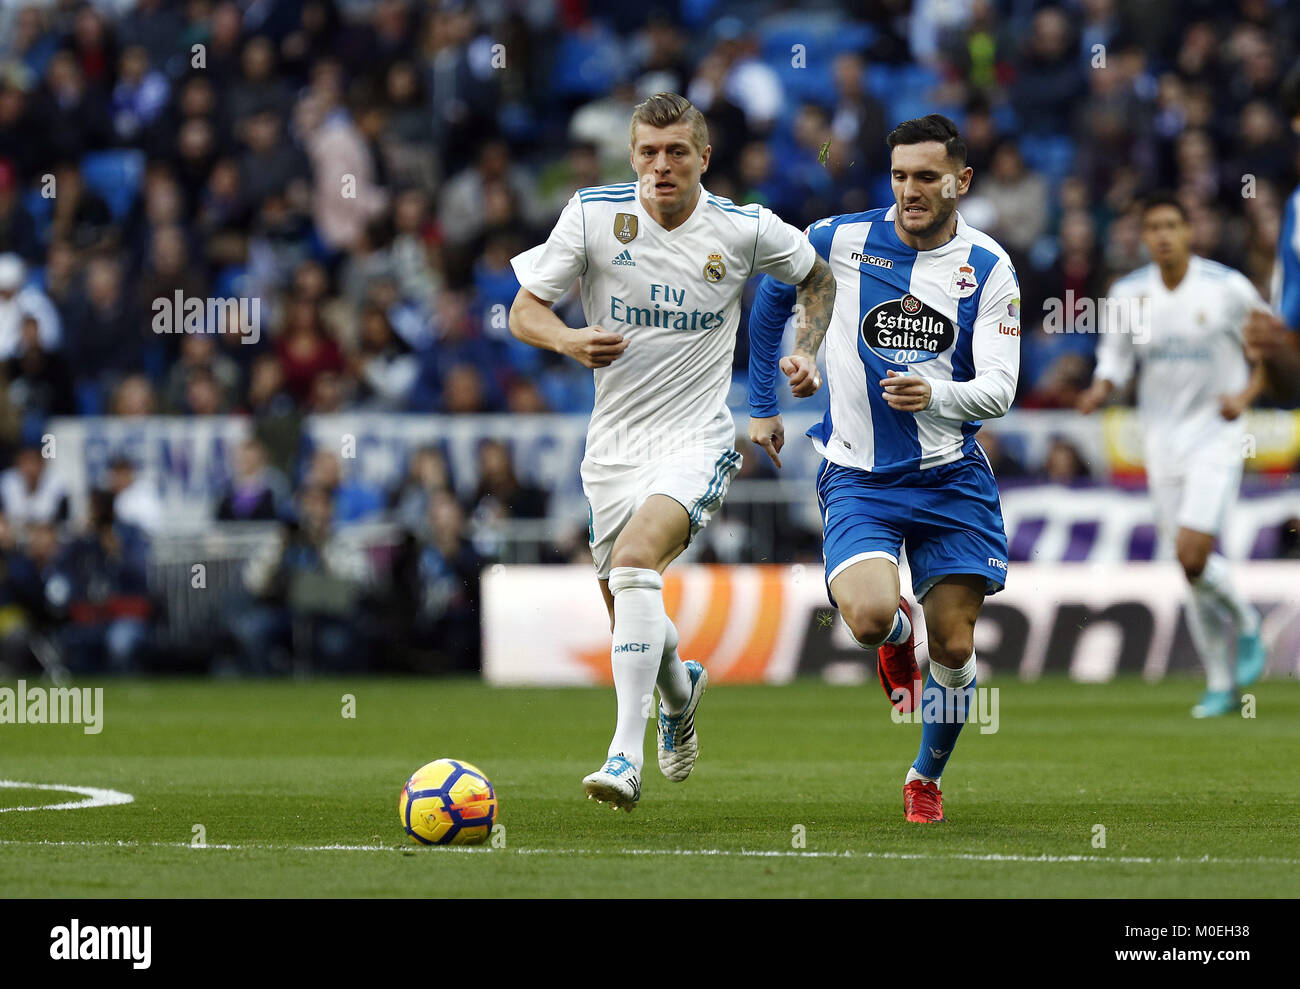 Madrid, Madrid, Spain. 21st Jan, 2018. Real Madrid Toni Kroos in action during the match between Real Madrid CF and Deportivo de la CoruÃ±a.Real Madrid faced Deportivo de la CoruÃ±a at the Santiago Bernabeu stadium during the Spanish league game ''La Liga''. Final score Real Madrid won 7-1. Credit: Manu Reino/SOPA/ZUMA Wire/Alamy Live News Stock Photo